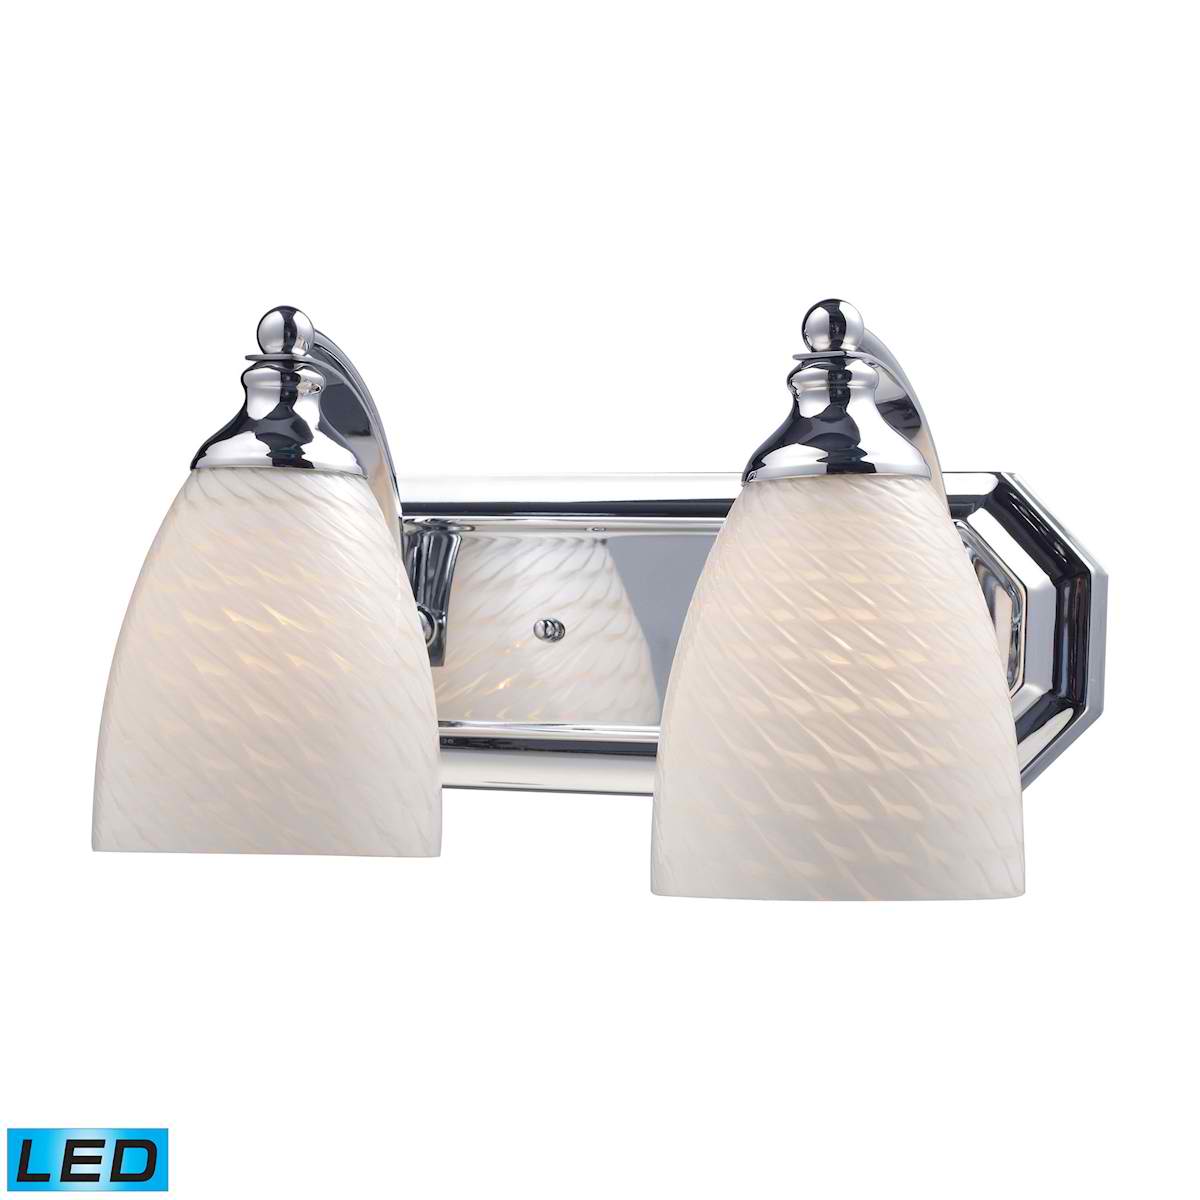 2 Light Vanity in Polished Chrome and White Swirl Glass - LED, 800 Lumens (1600 Lumens Total) with Full Scale